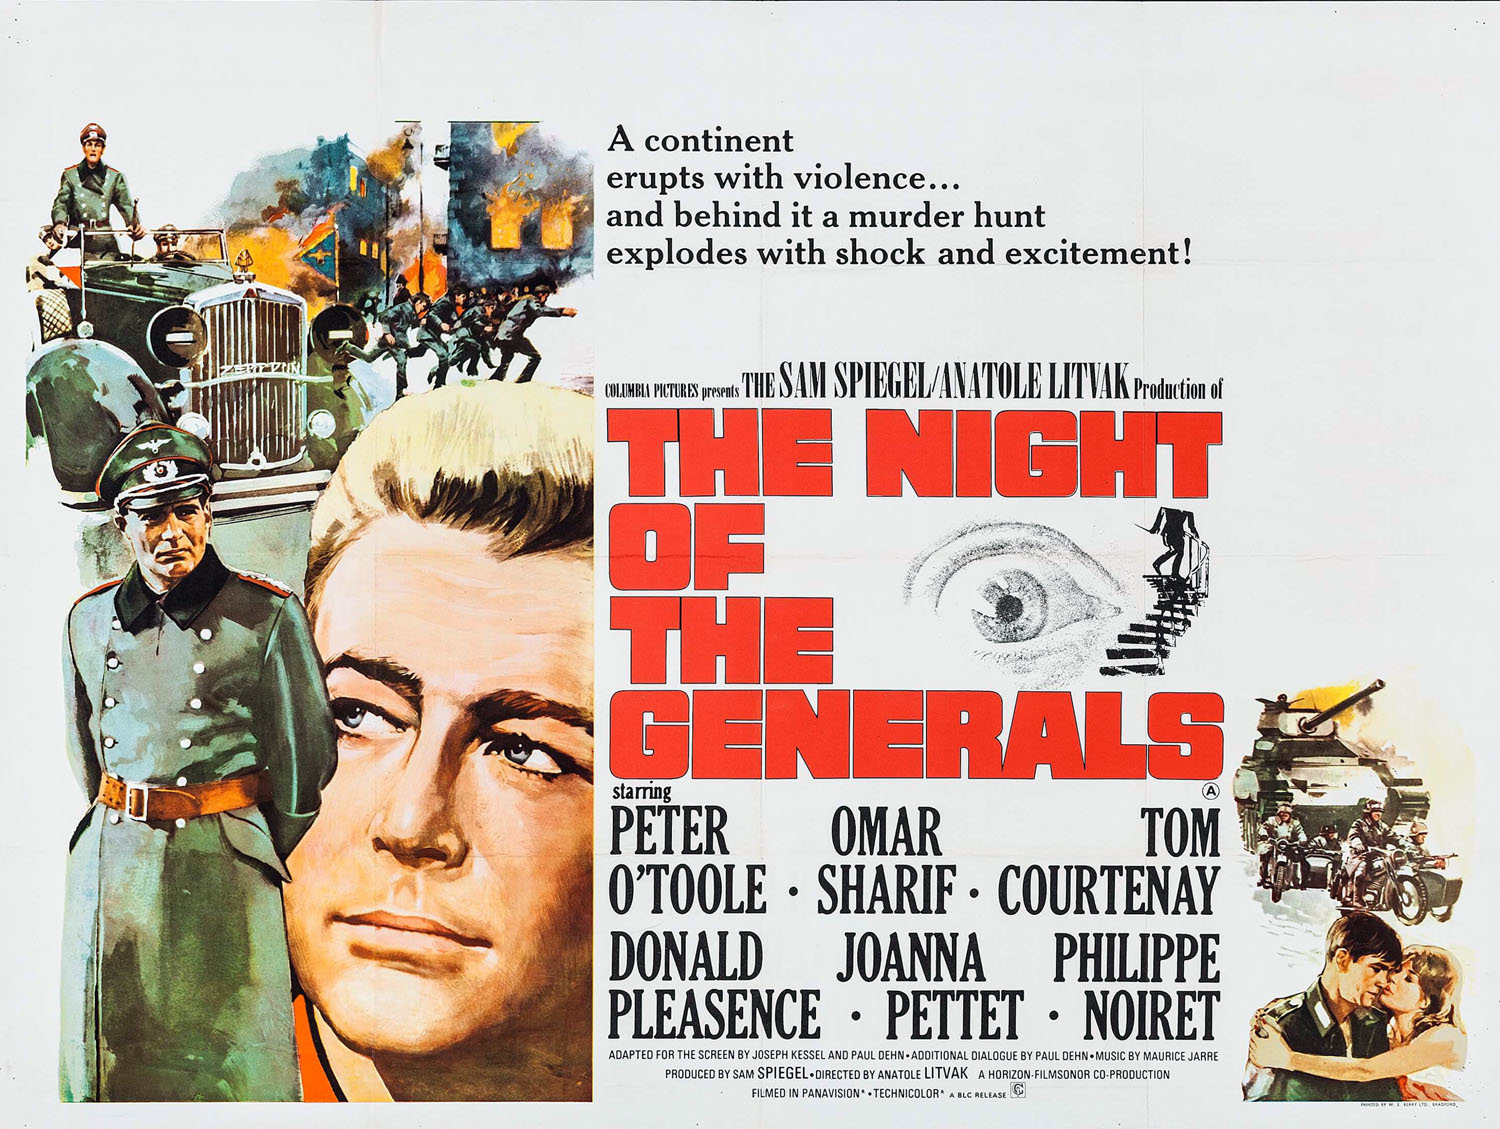 NIGHT OF THE GENERALS